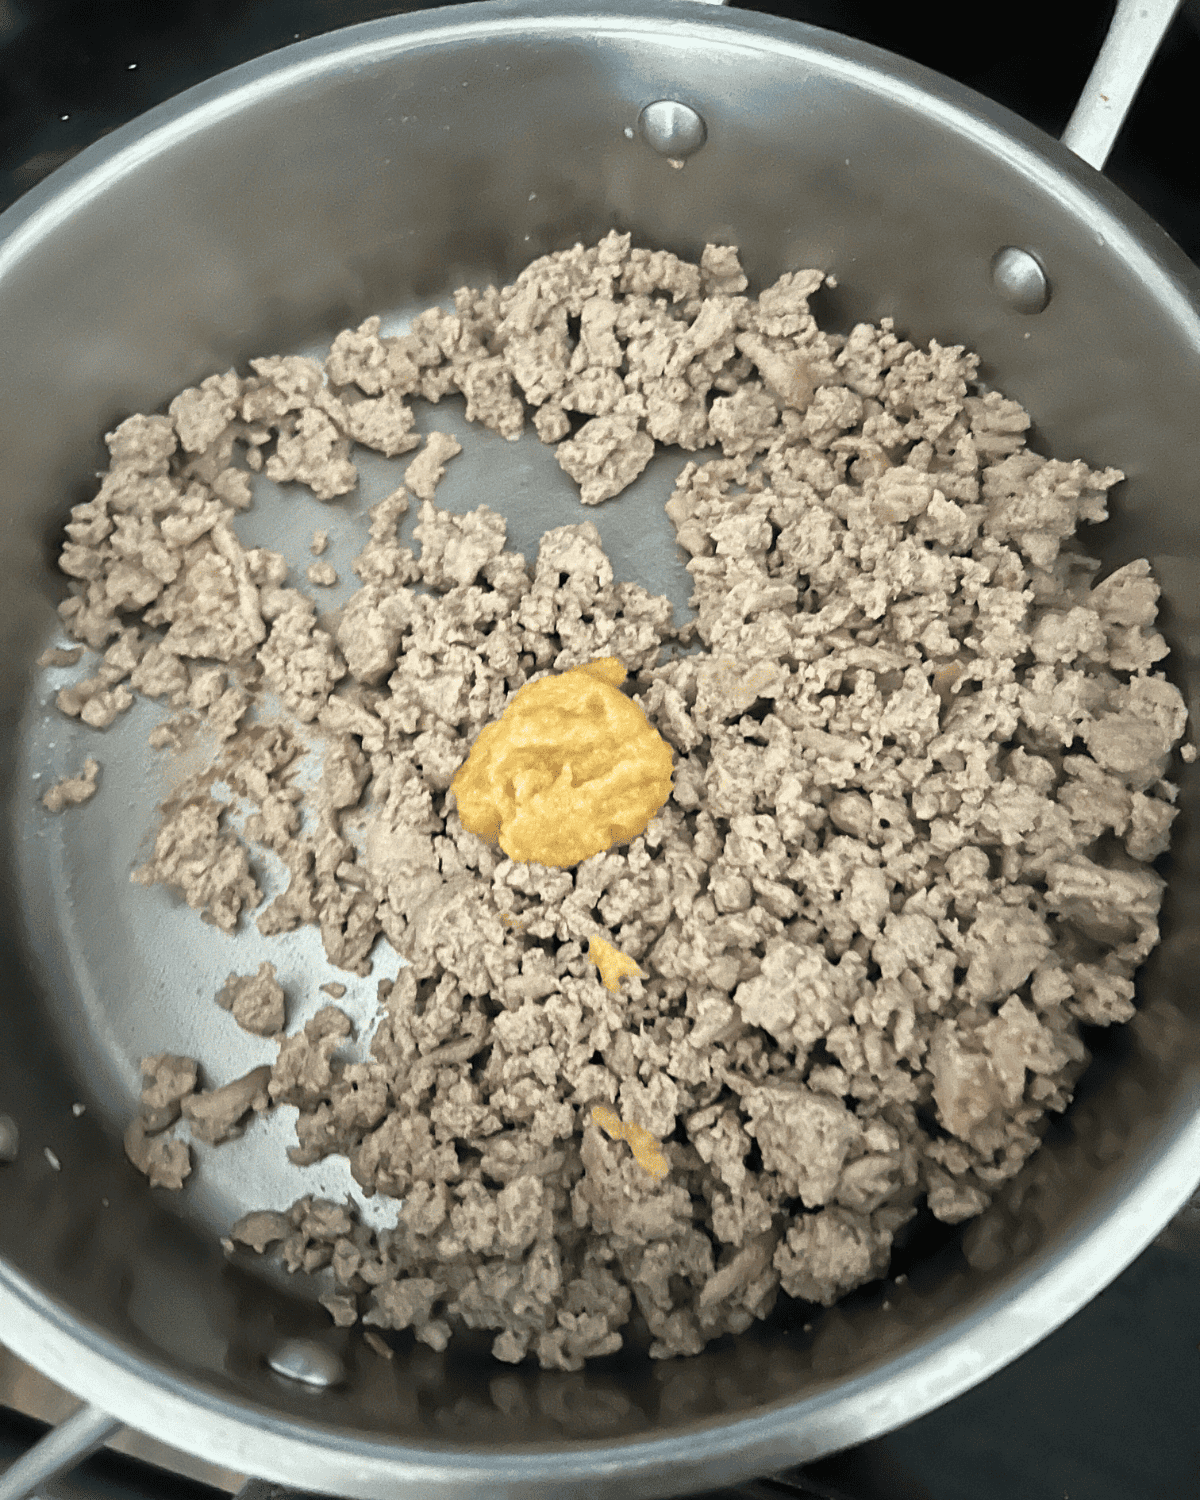 ginger and ground chicken cooked together in a skillet.